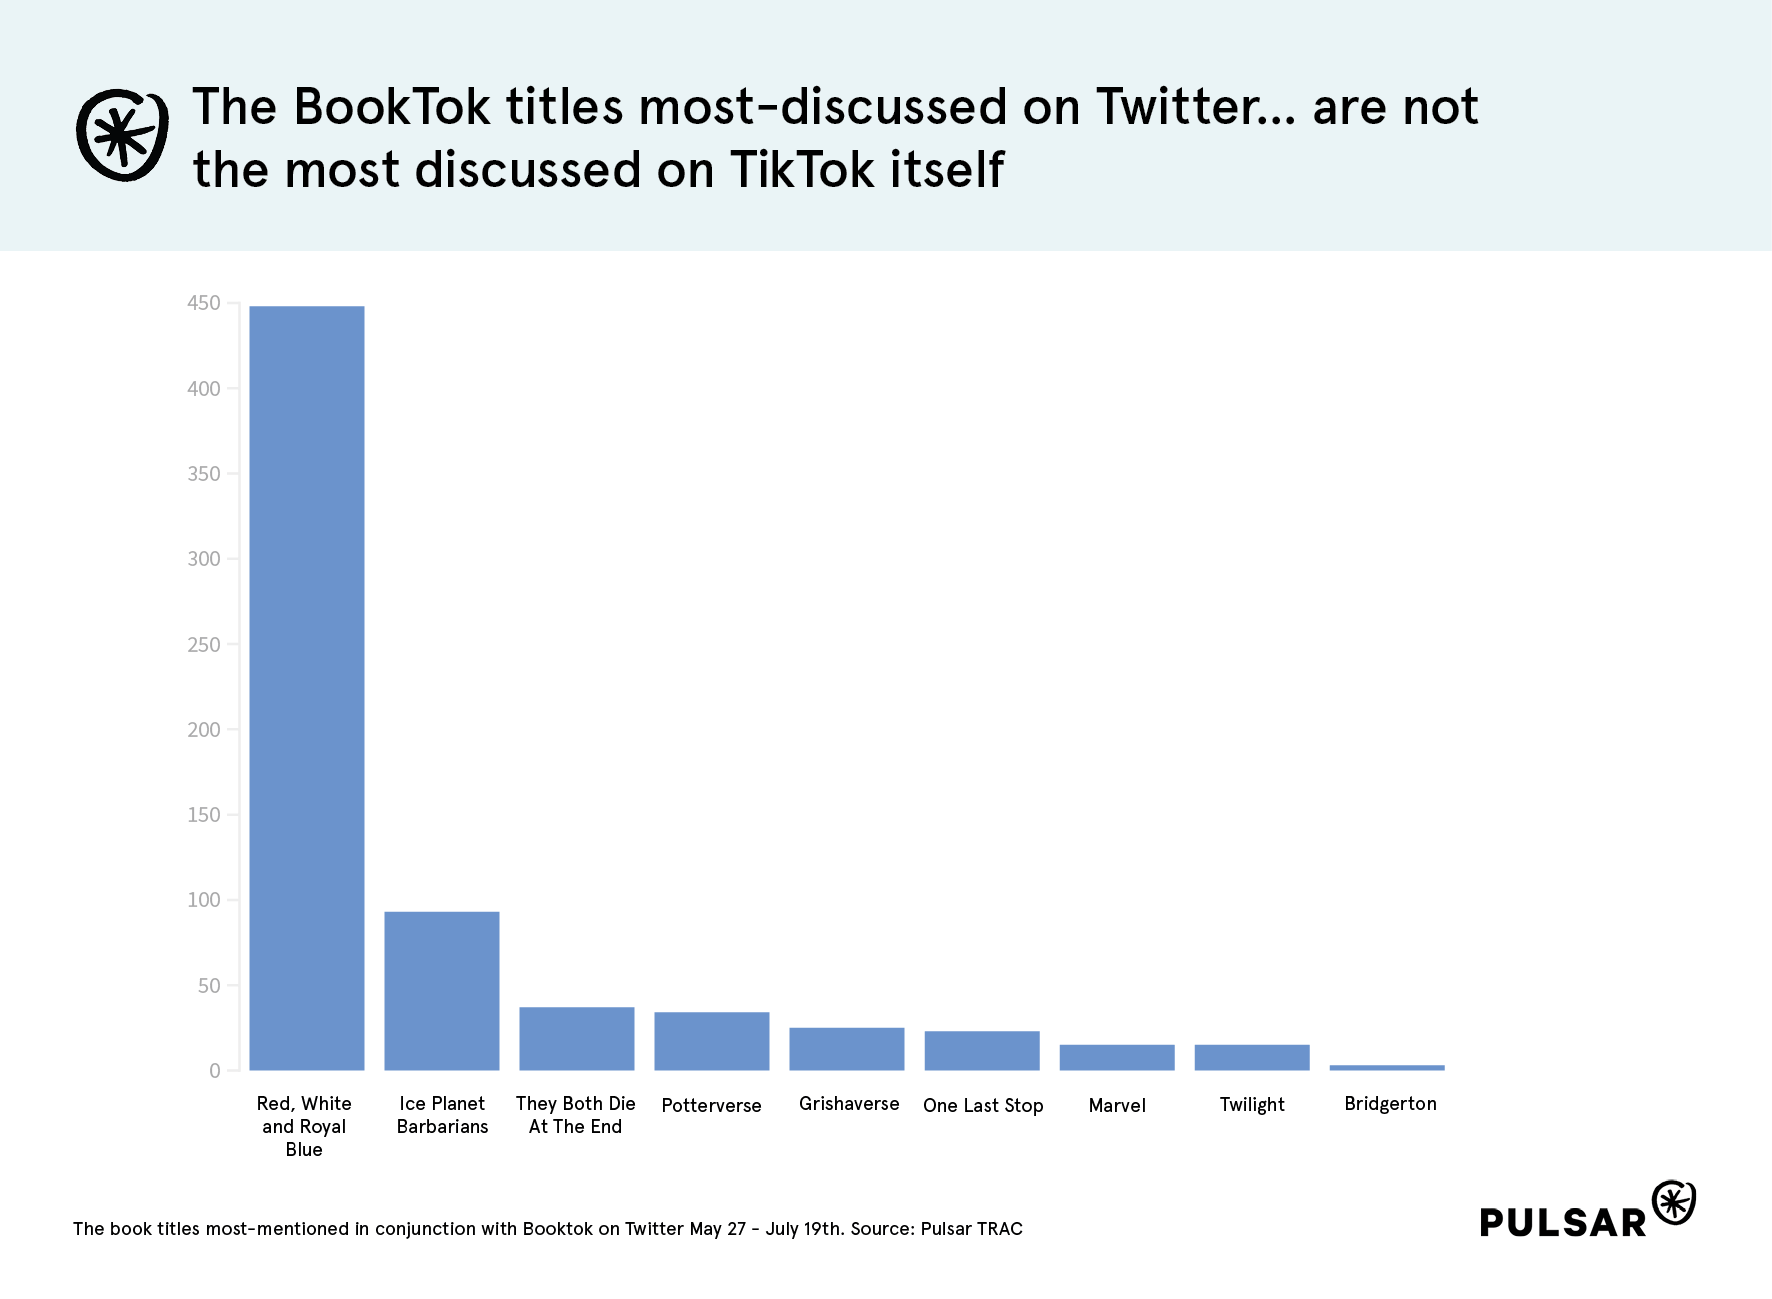 Most discussed BookTok titles on Twitter